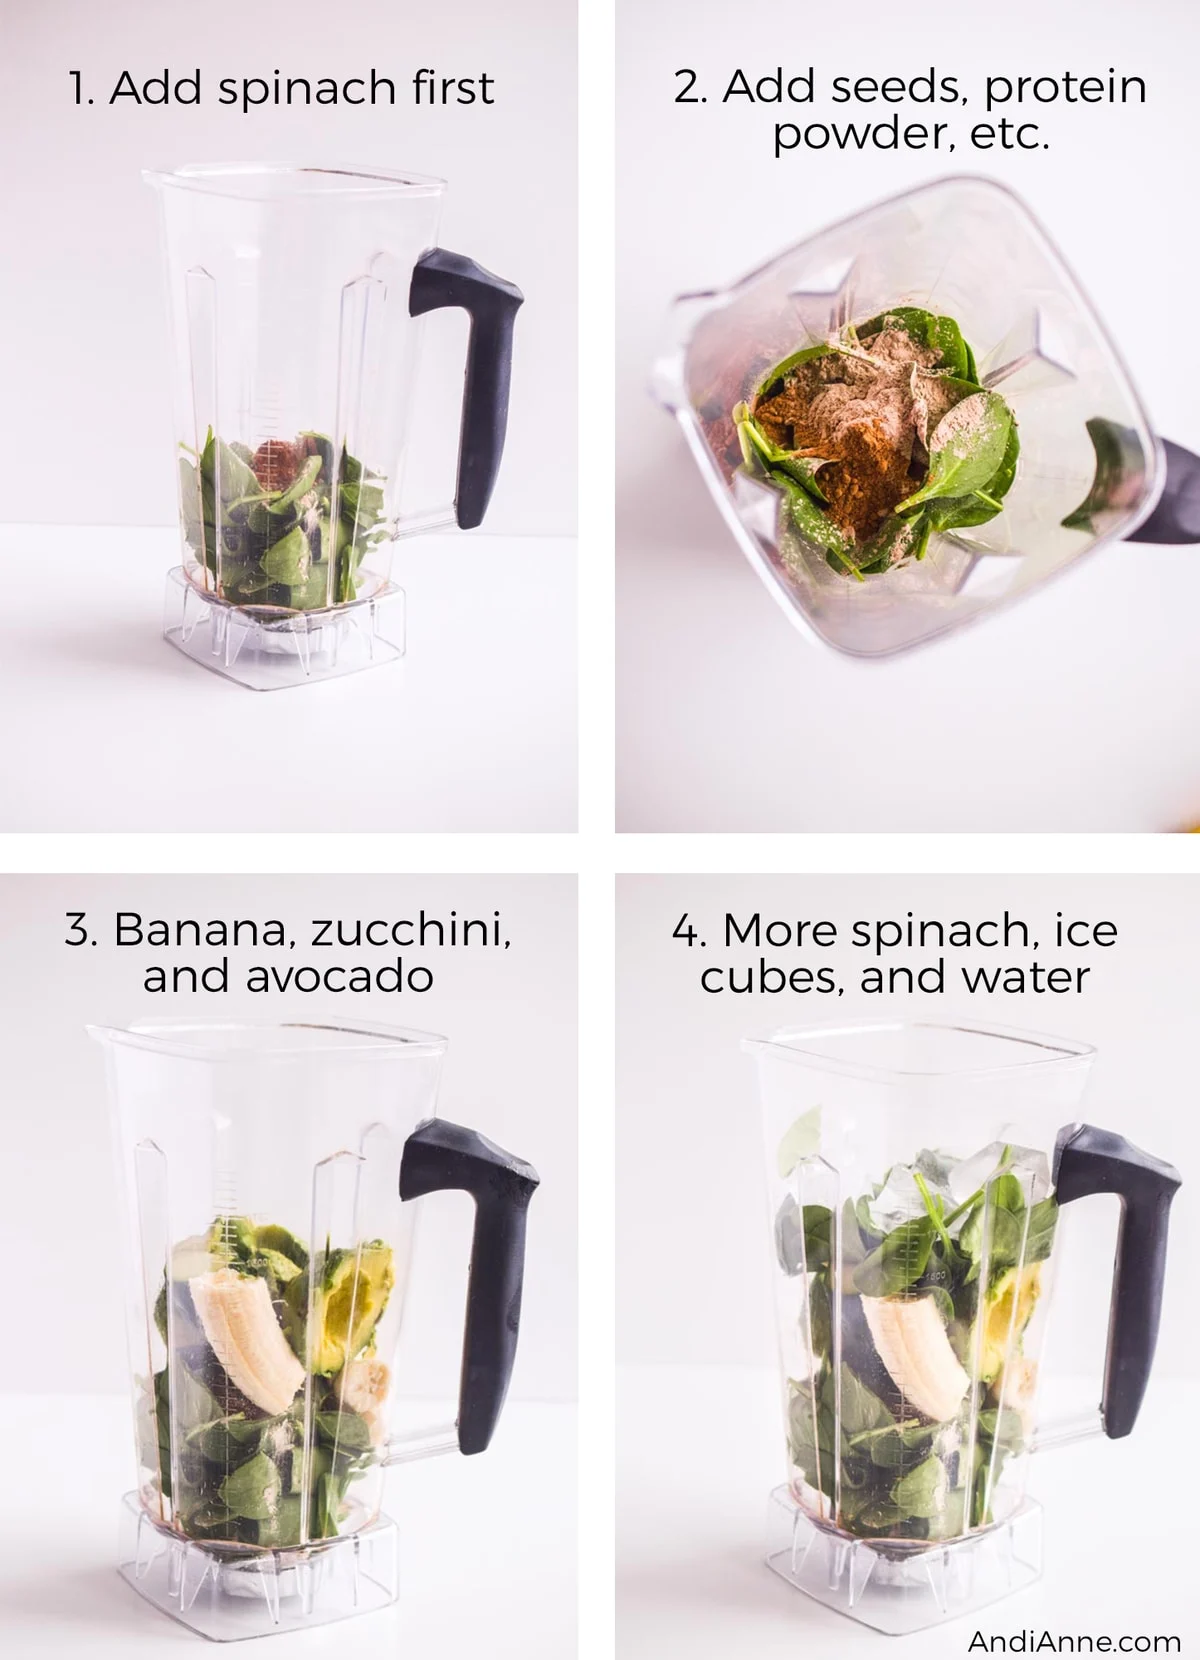 Blender cup holding ingredients to make smoothie. Includes spinach, protein powder, avocado, and ice cubes